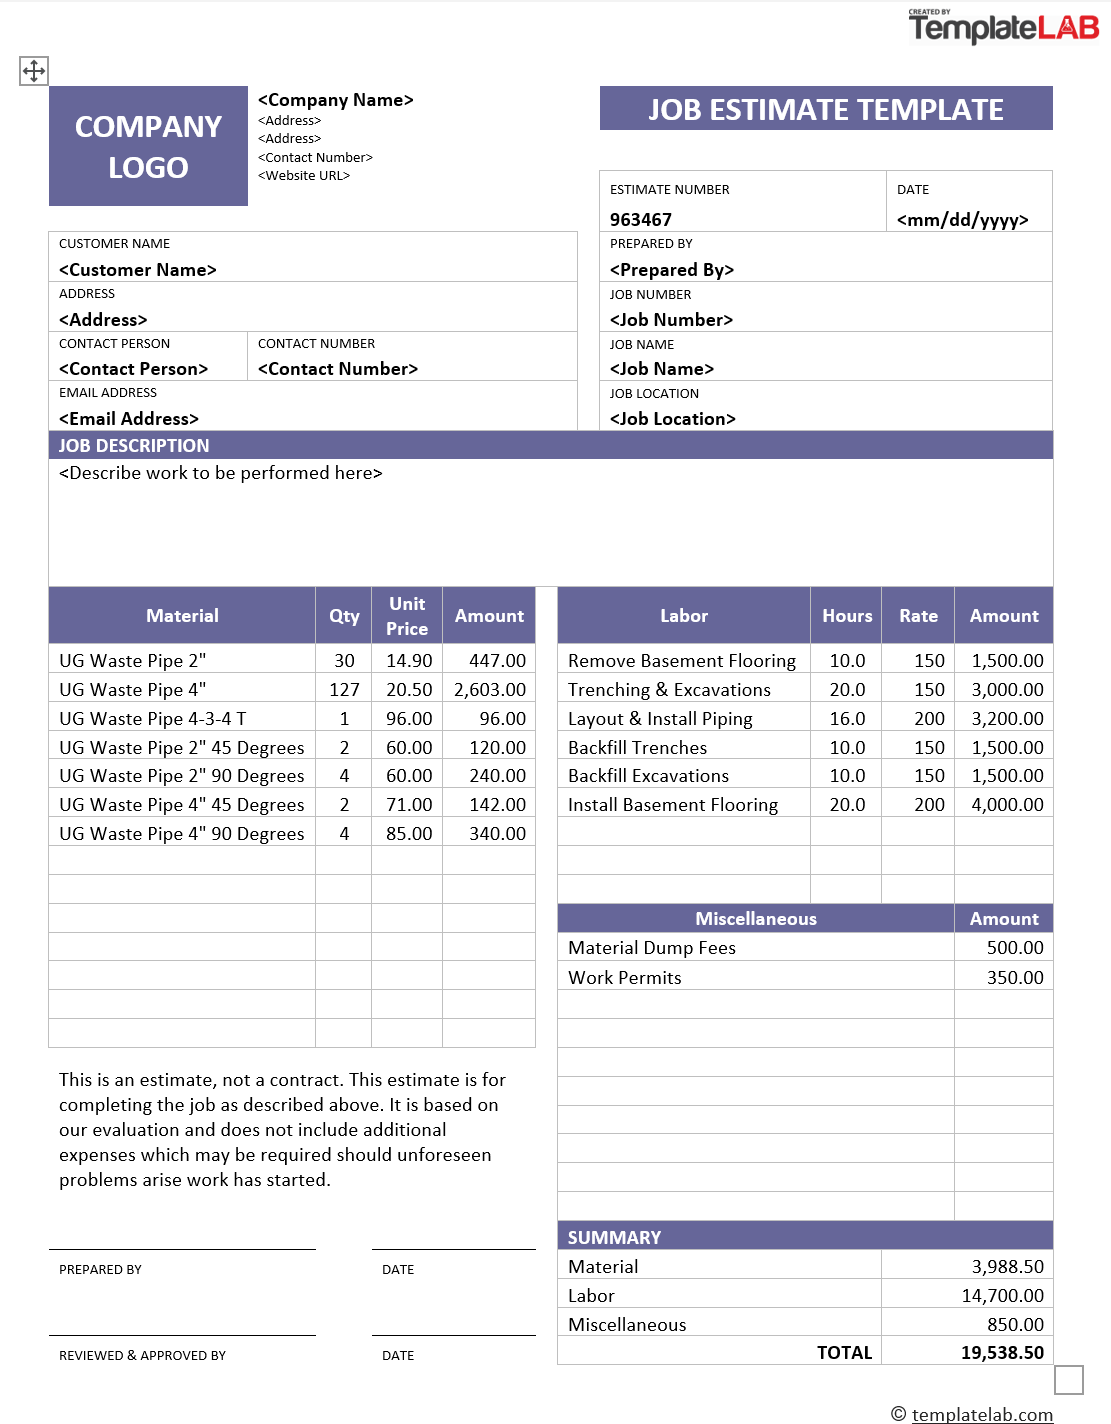 10 Free Estimate Template Forms [Construction, Repair, Cleaning]